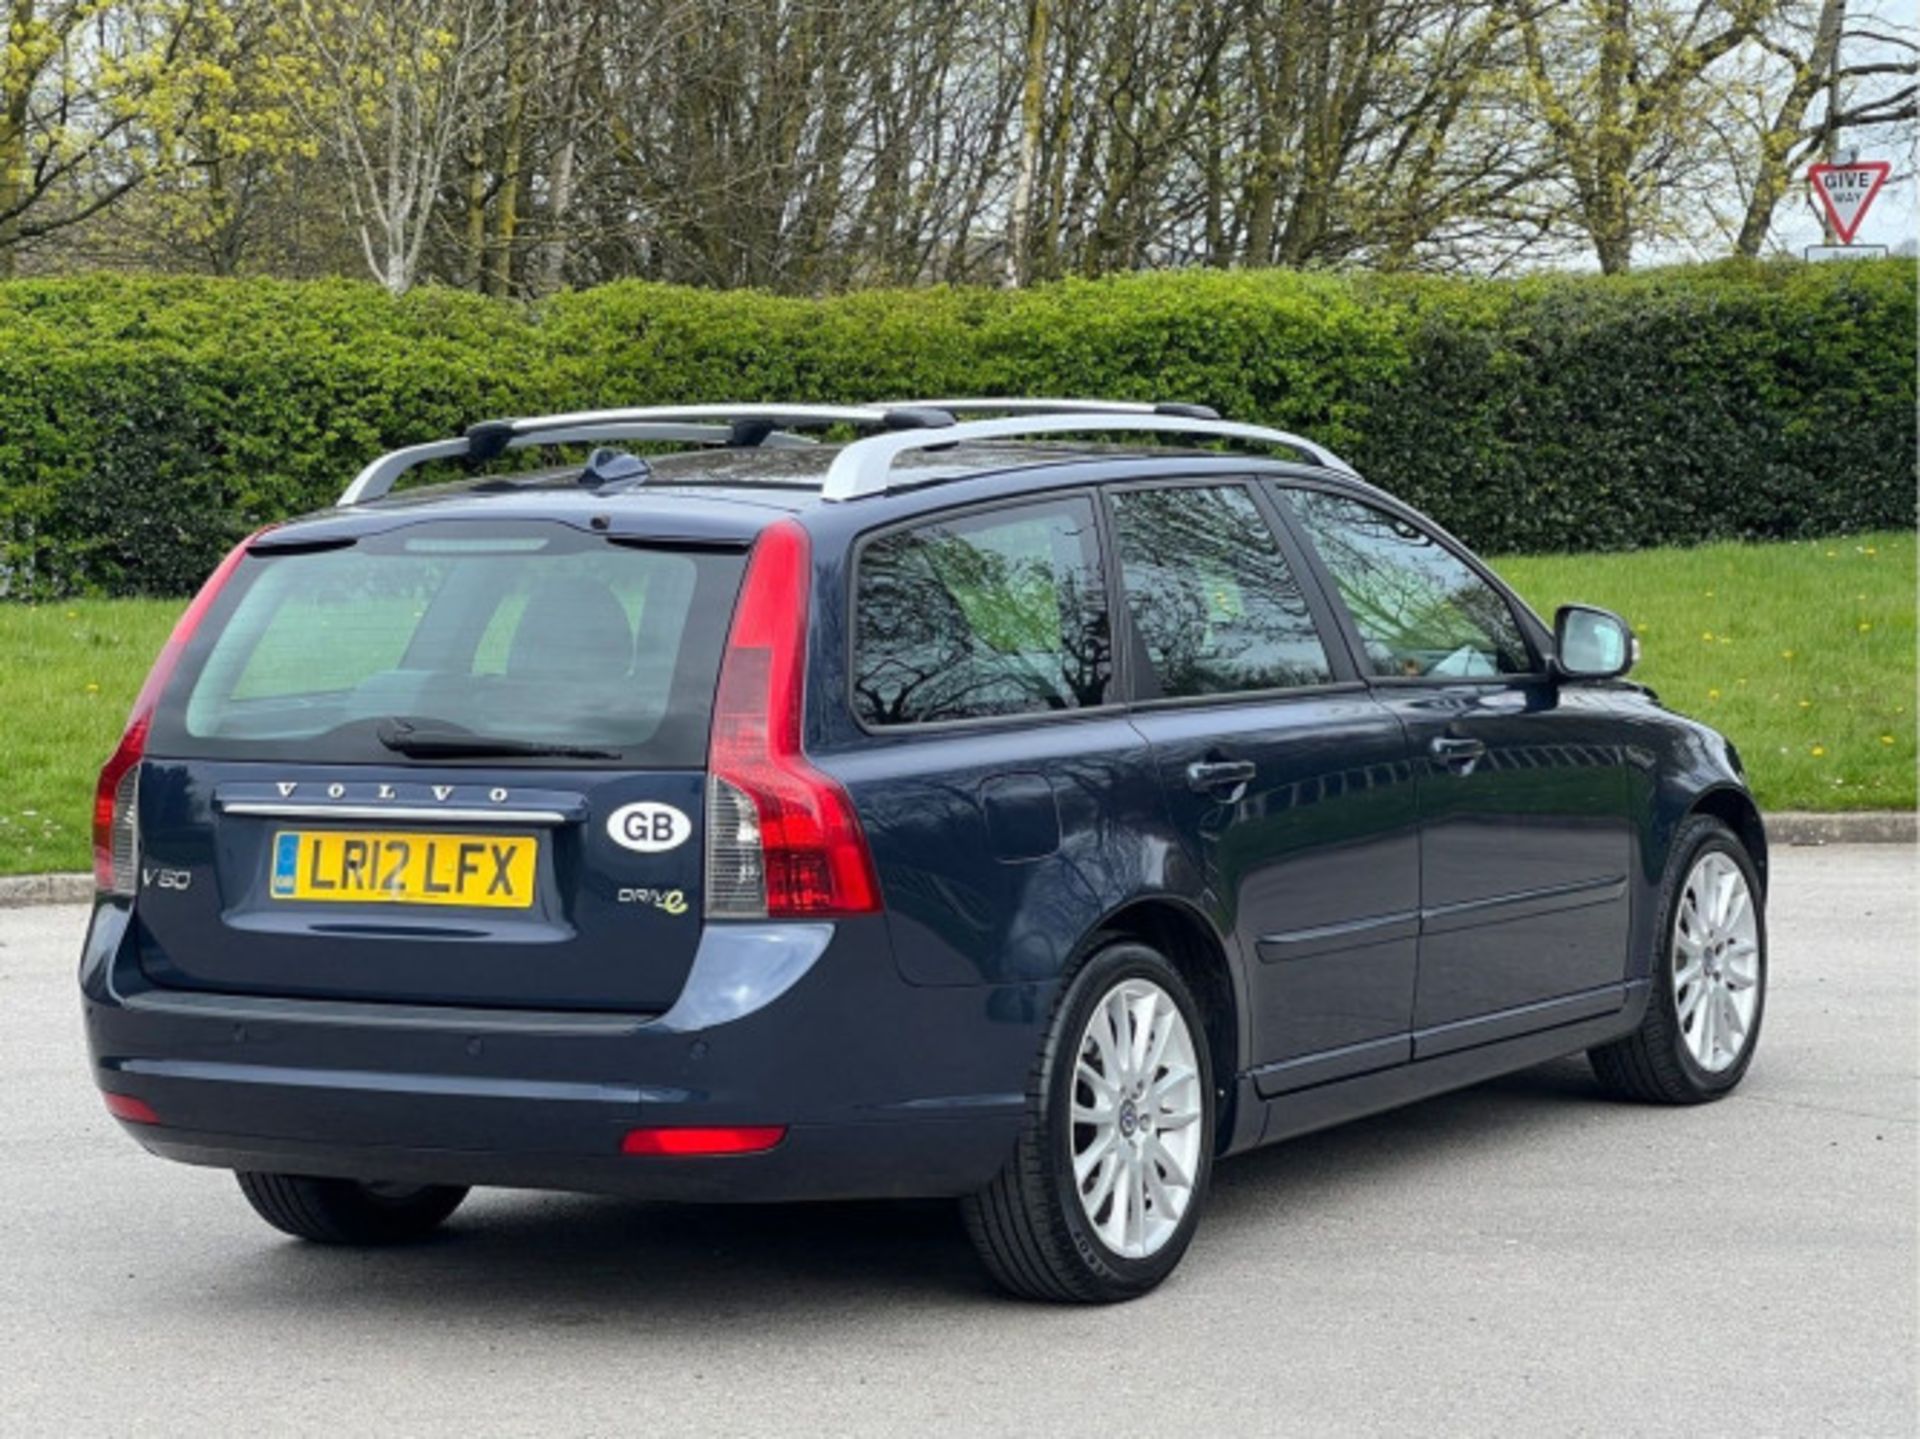 VOLVO V50 1.6D DRIVE SE LUX EDITION EURO 5 (S/S) 5DR (2012) - Image 41 of 88